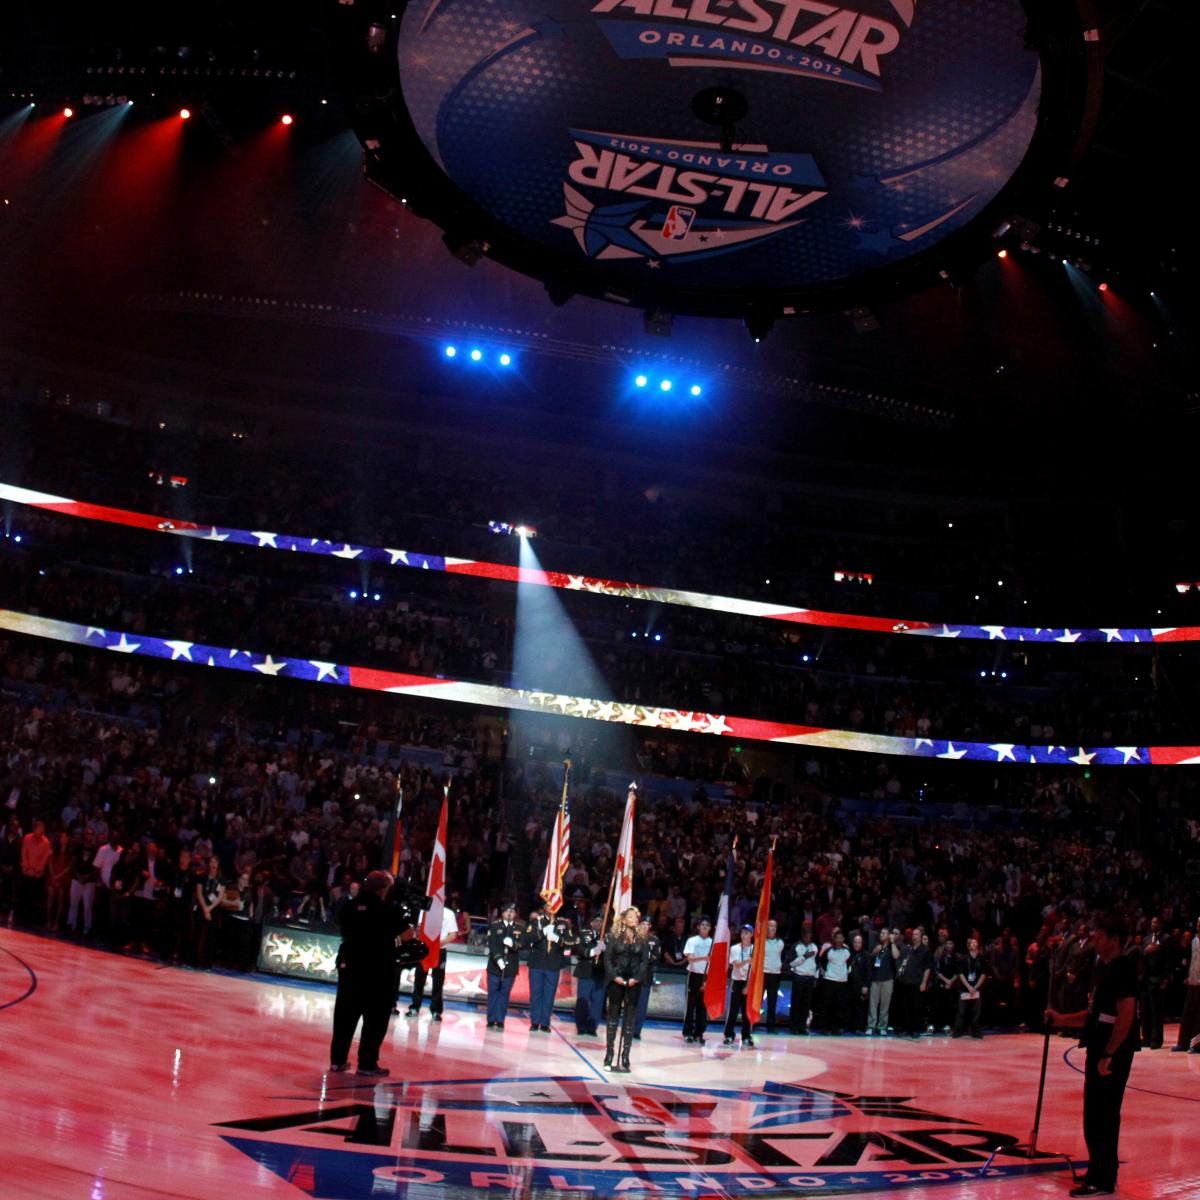 Nba All Star Weekend 2013 Ideas For New Events Next Year News